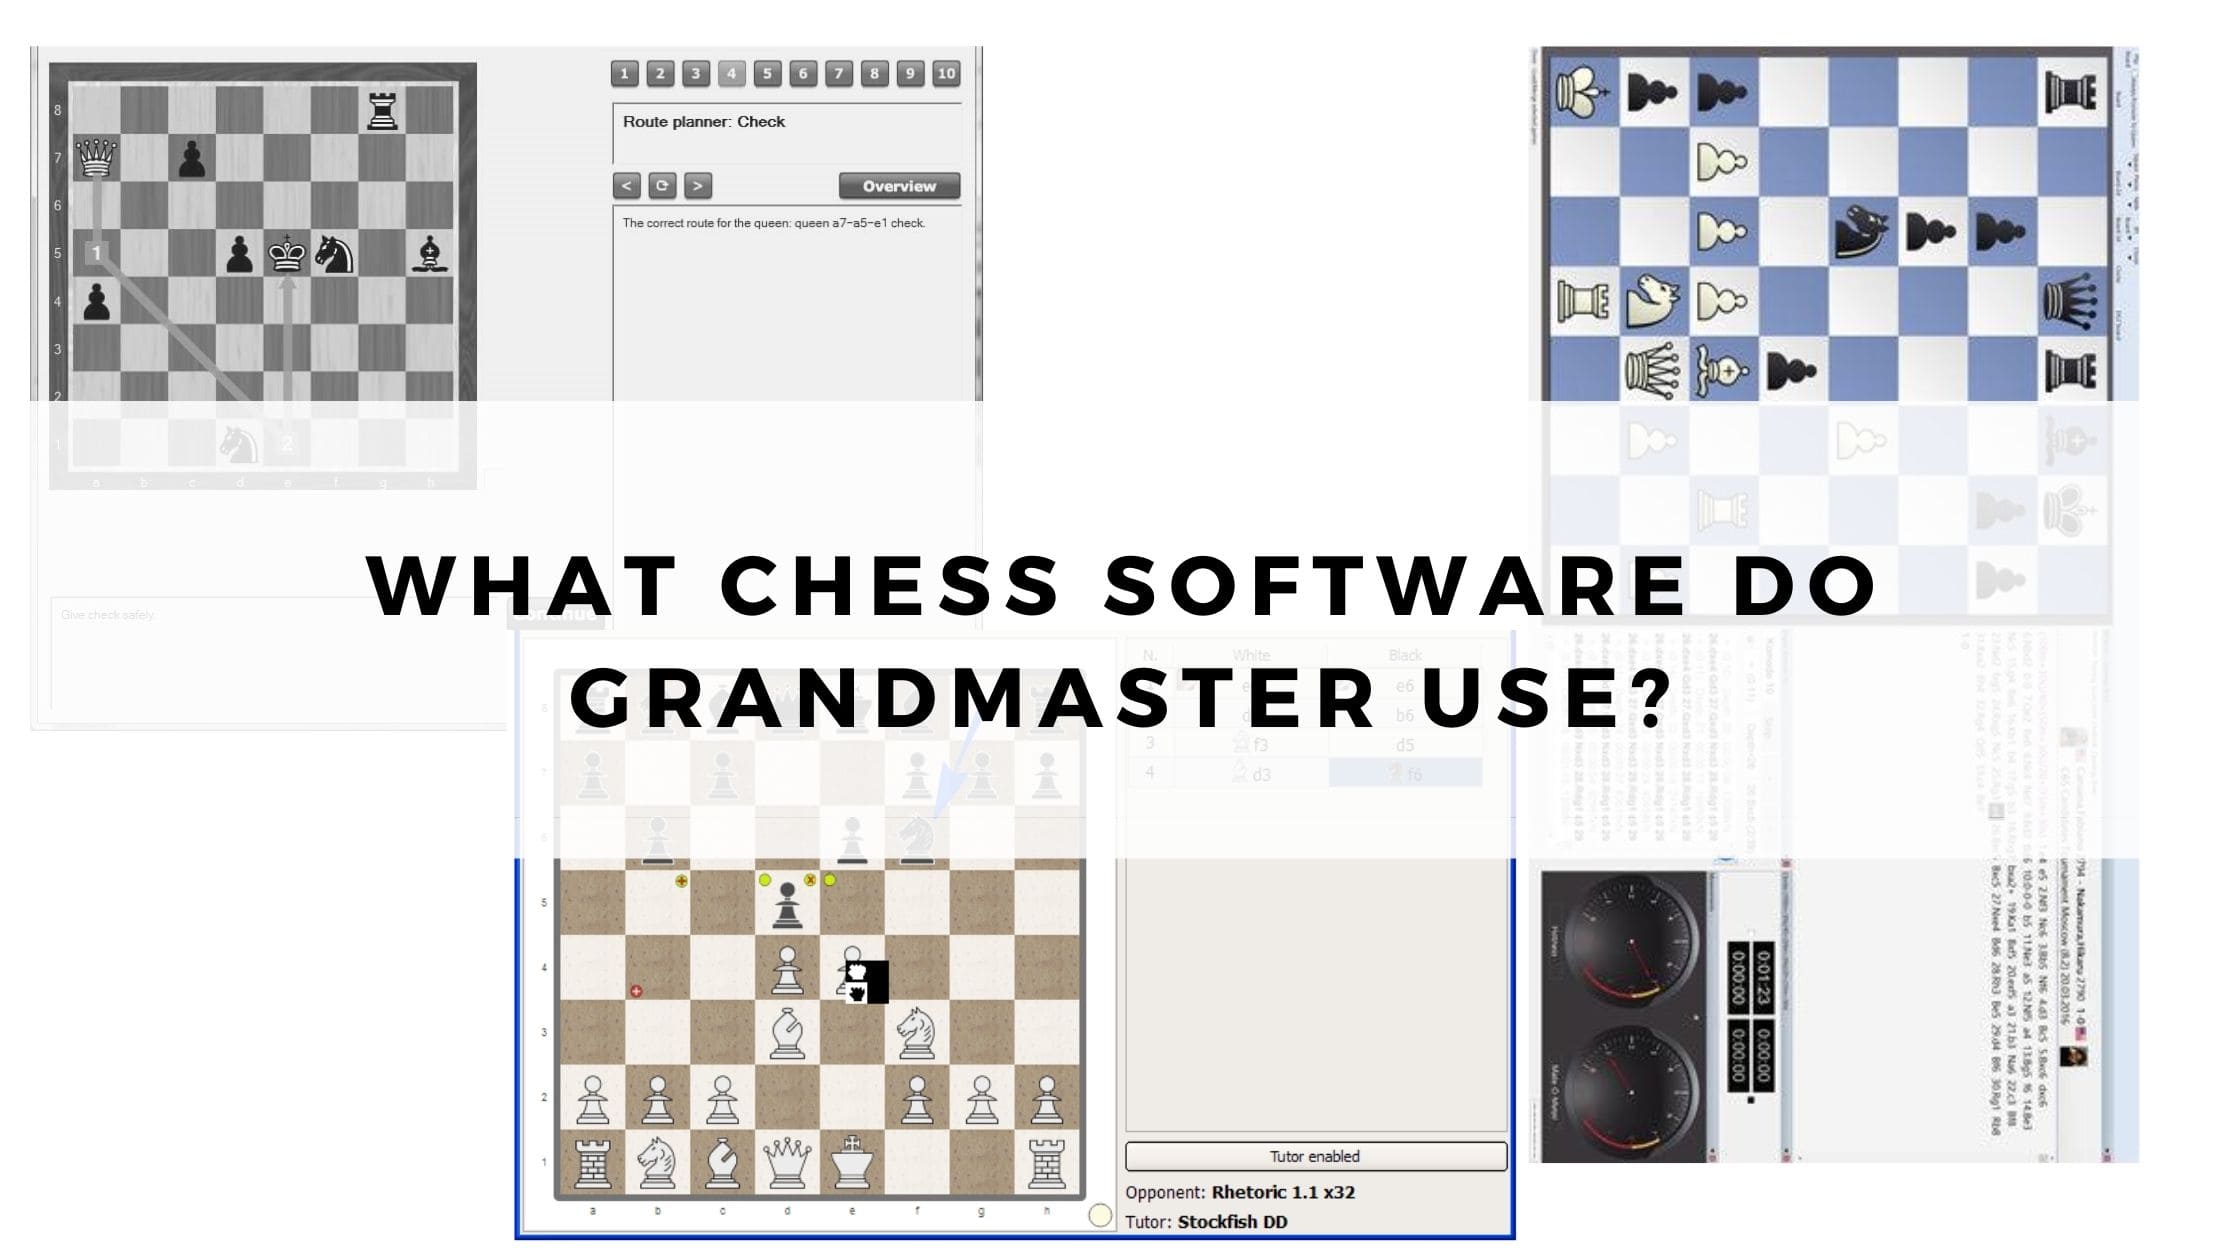 What Chess Software do Grandmaster Use?